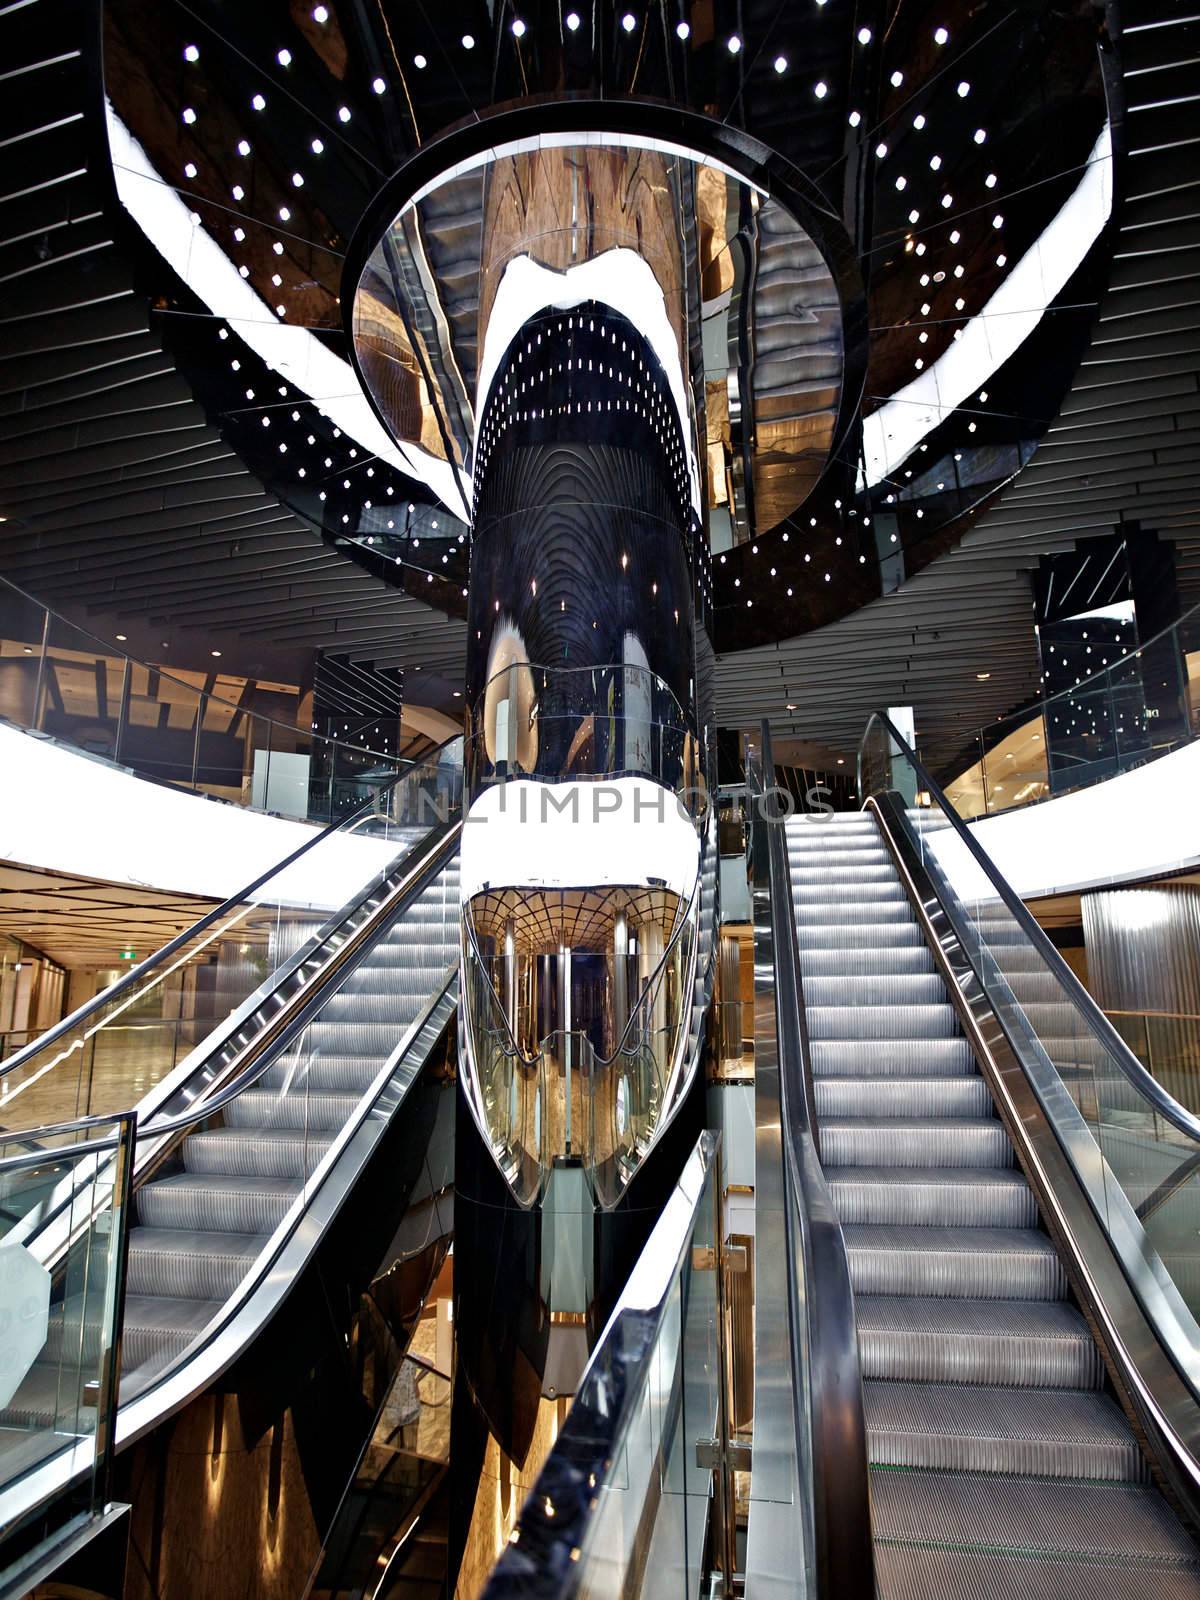 Inside a shopping mall with the escalator interior